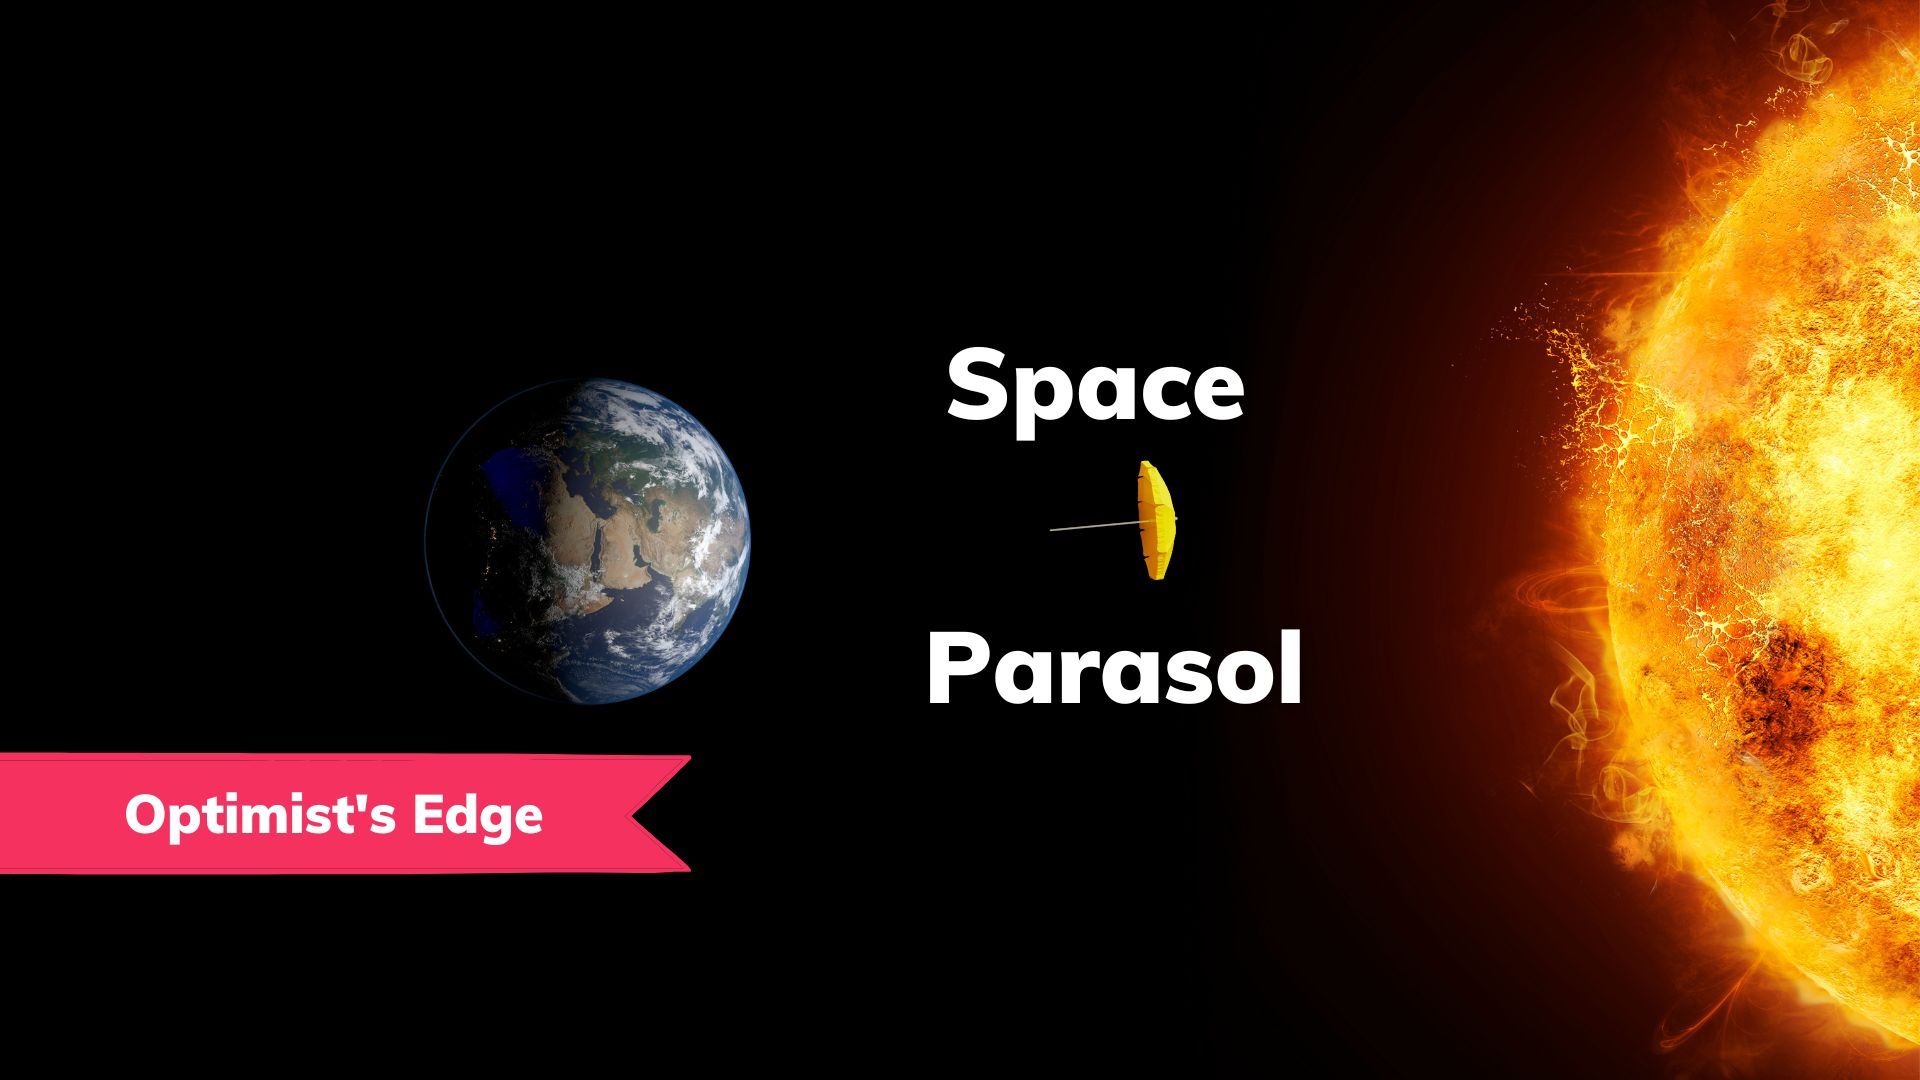 💡 Optimist's Edge: Space parasol to slow global warming